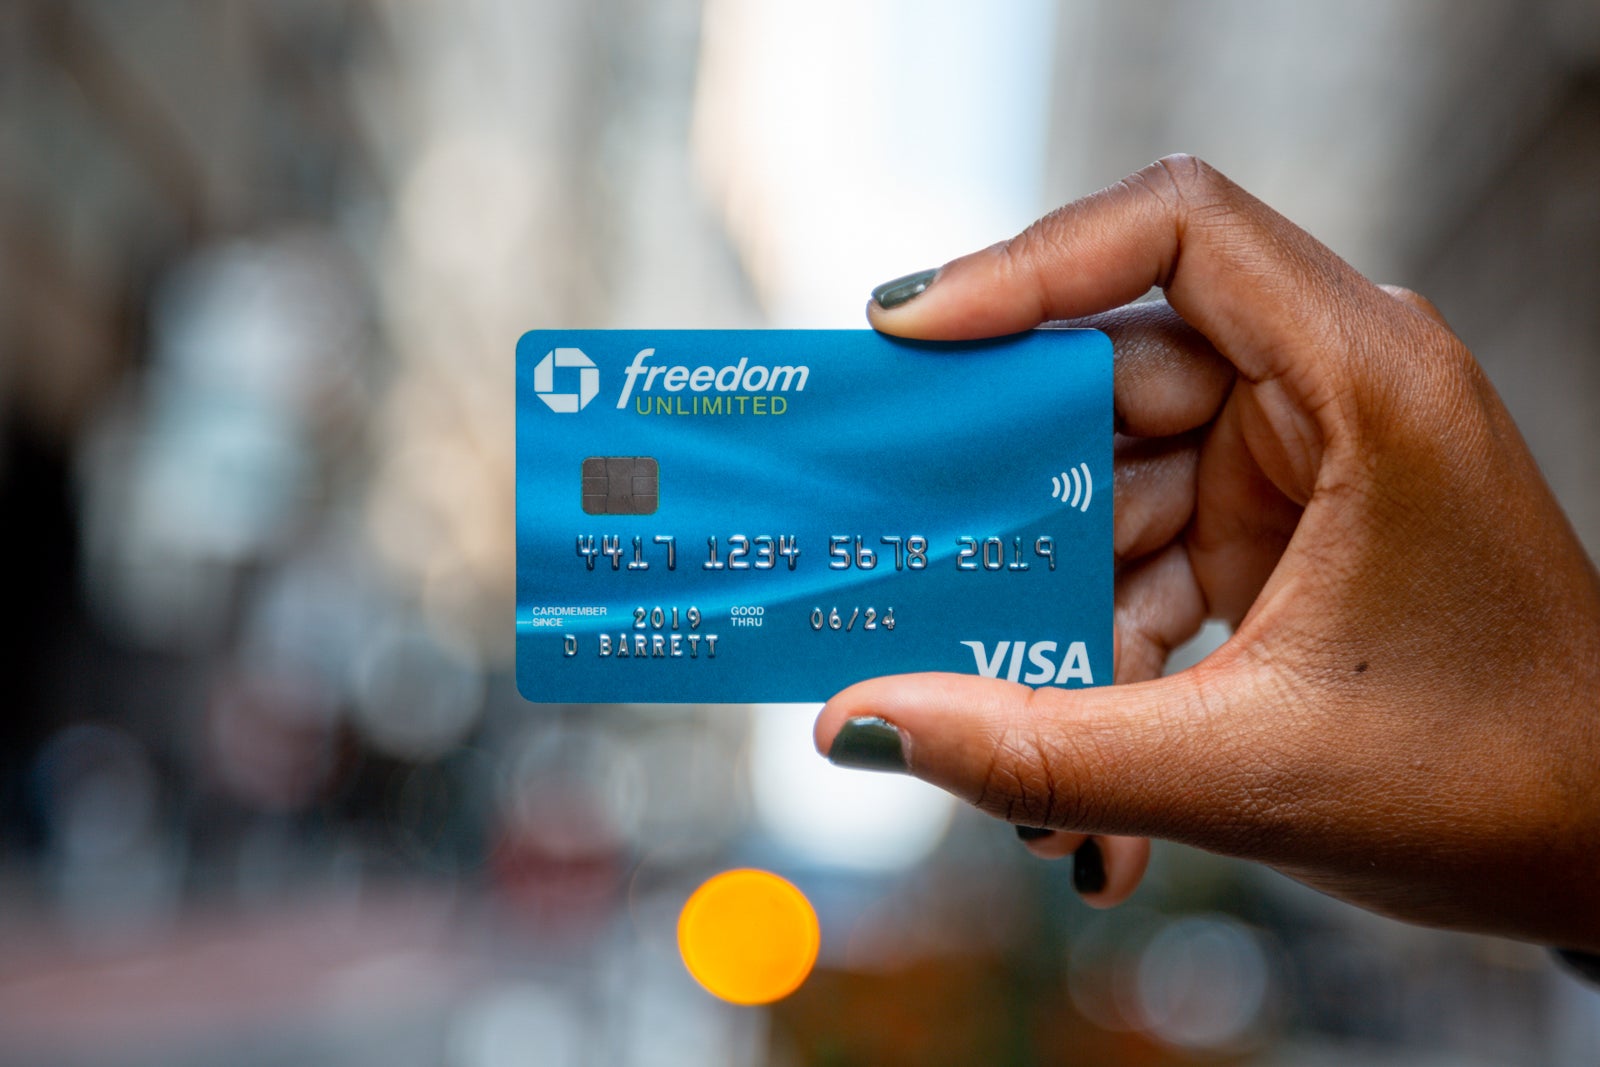 chase freedom card travel insurance